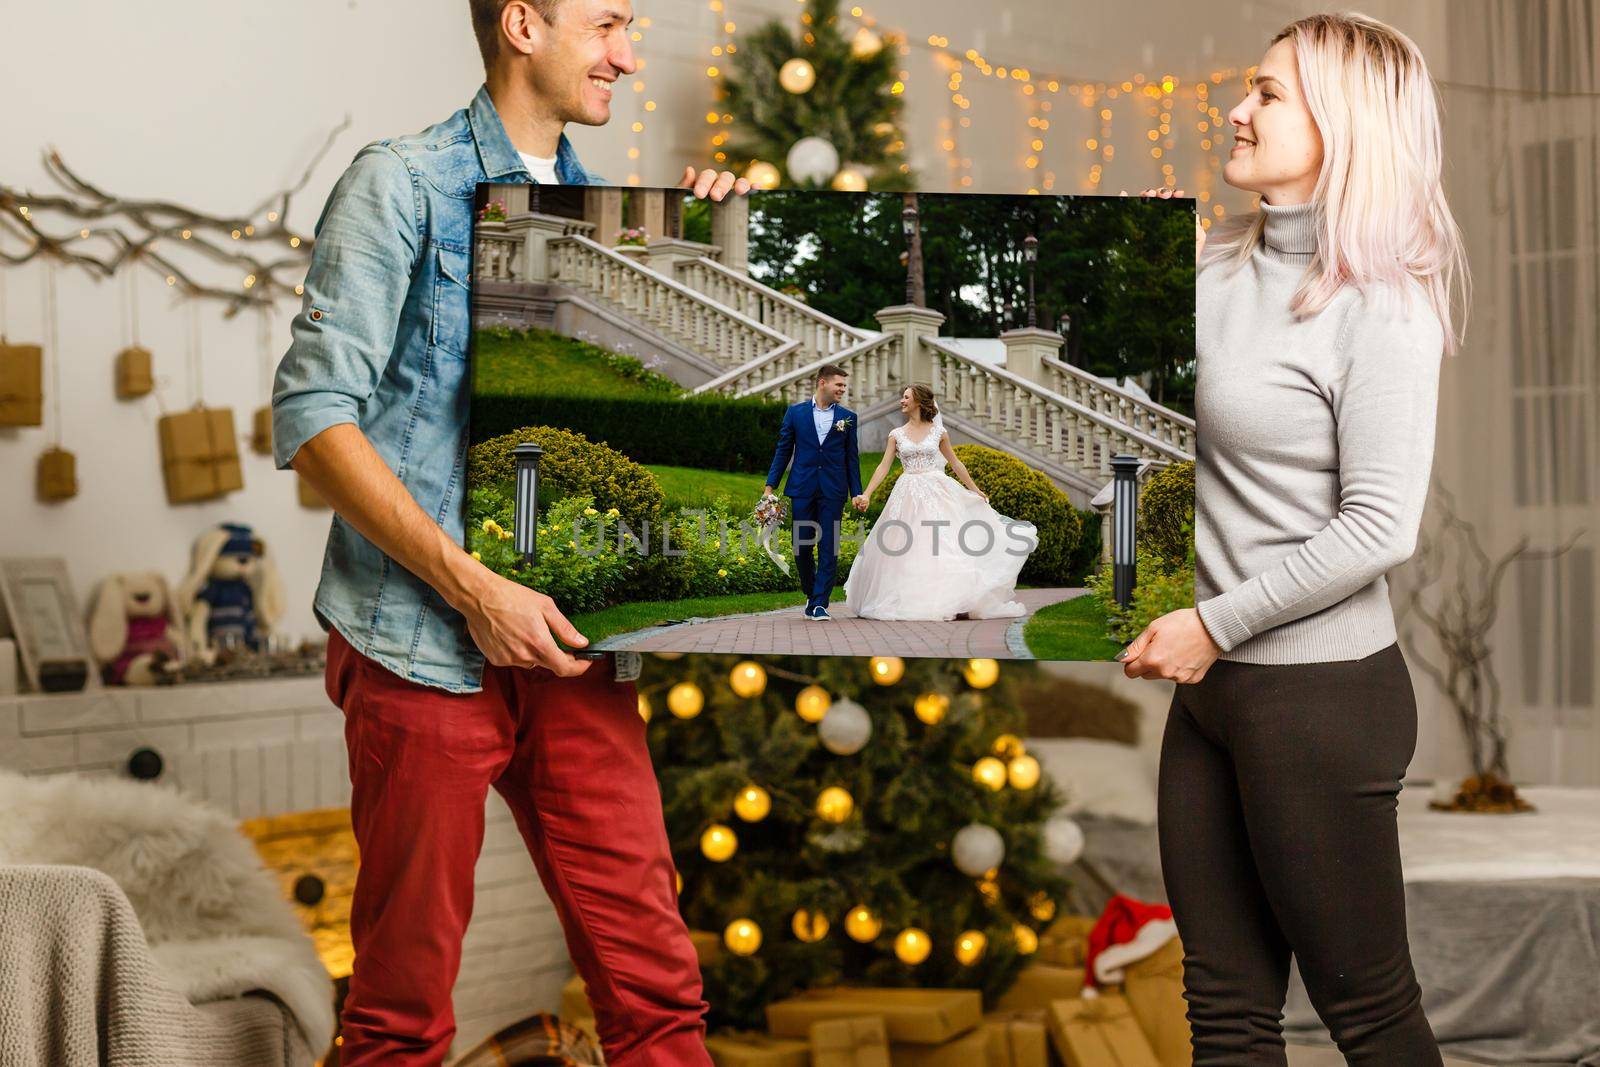 woman holding a photo canvas on the background of a Christmas interior.